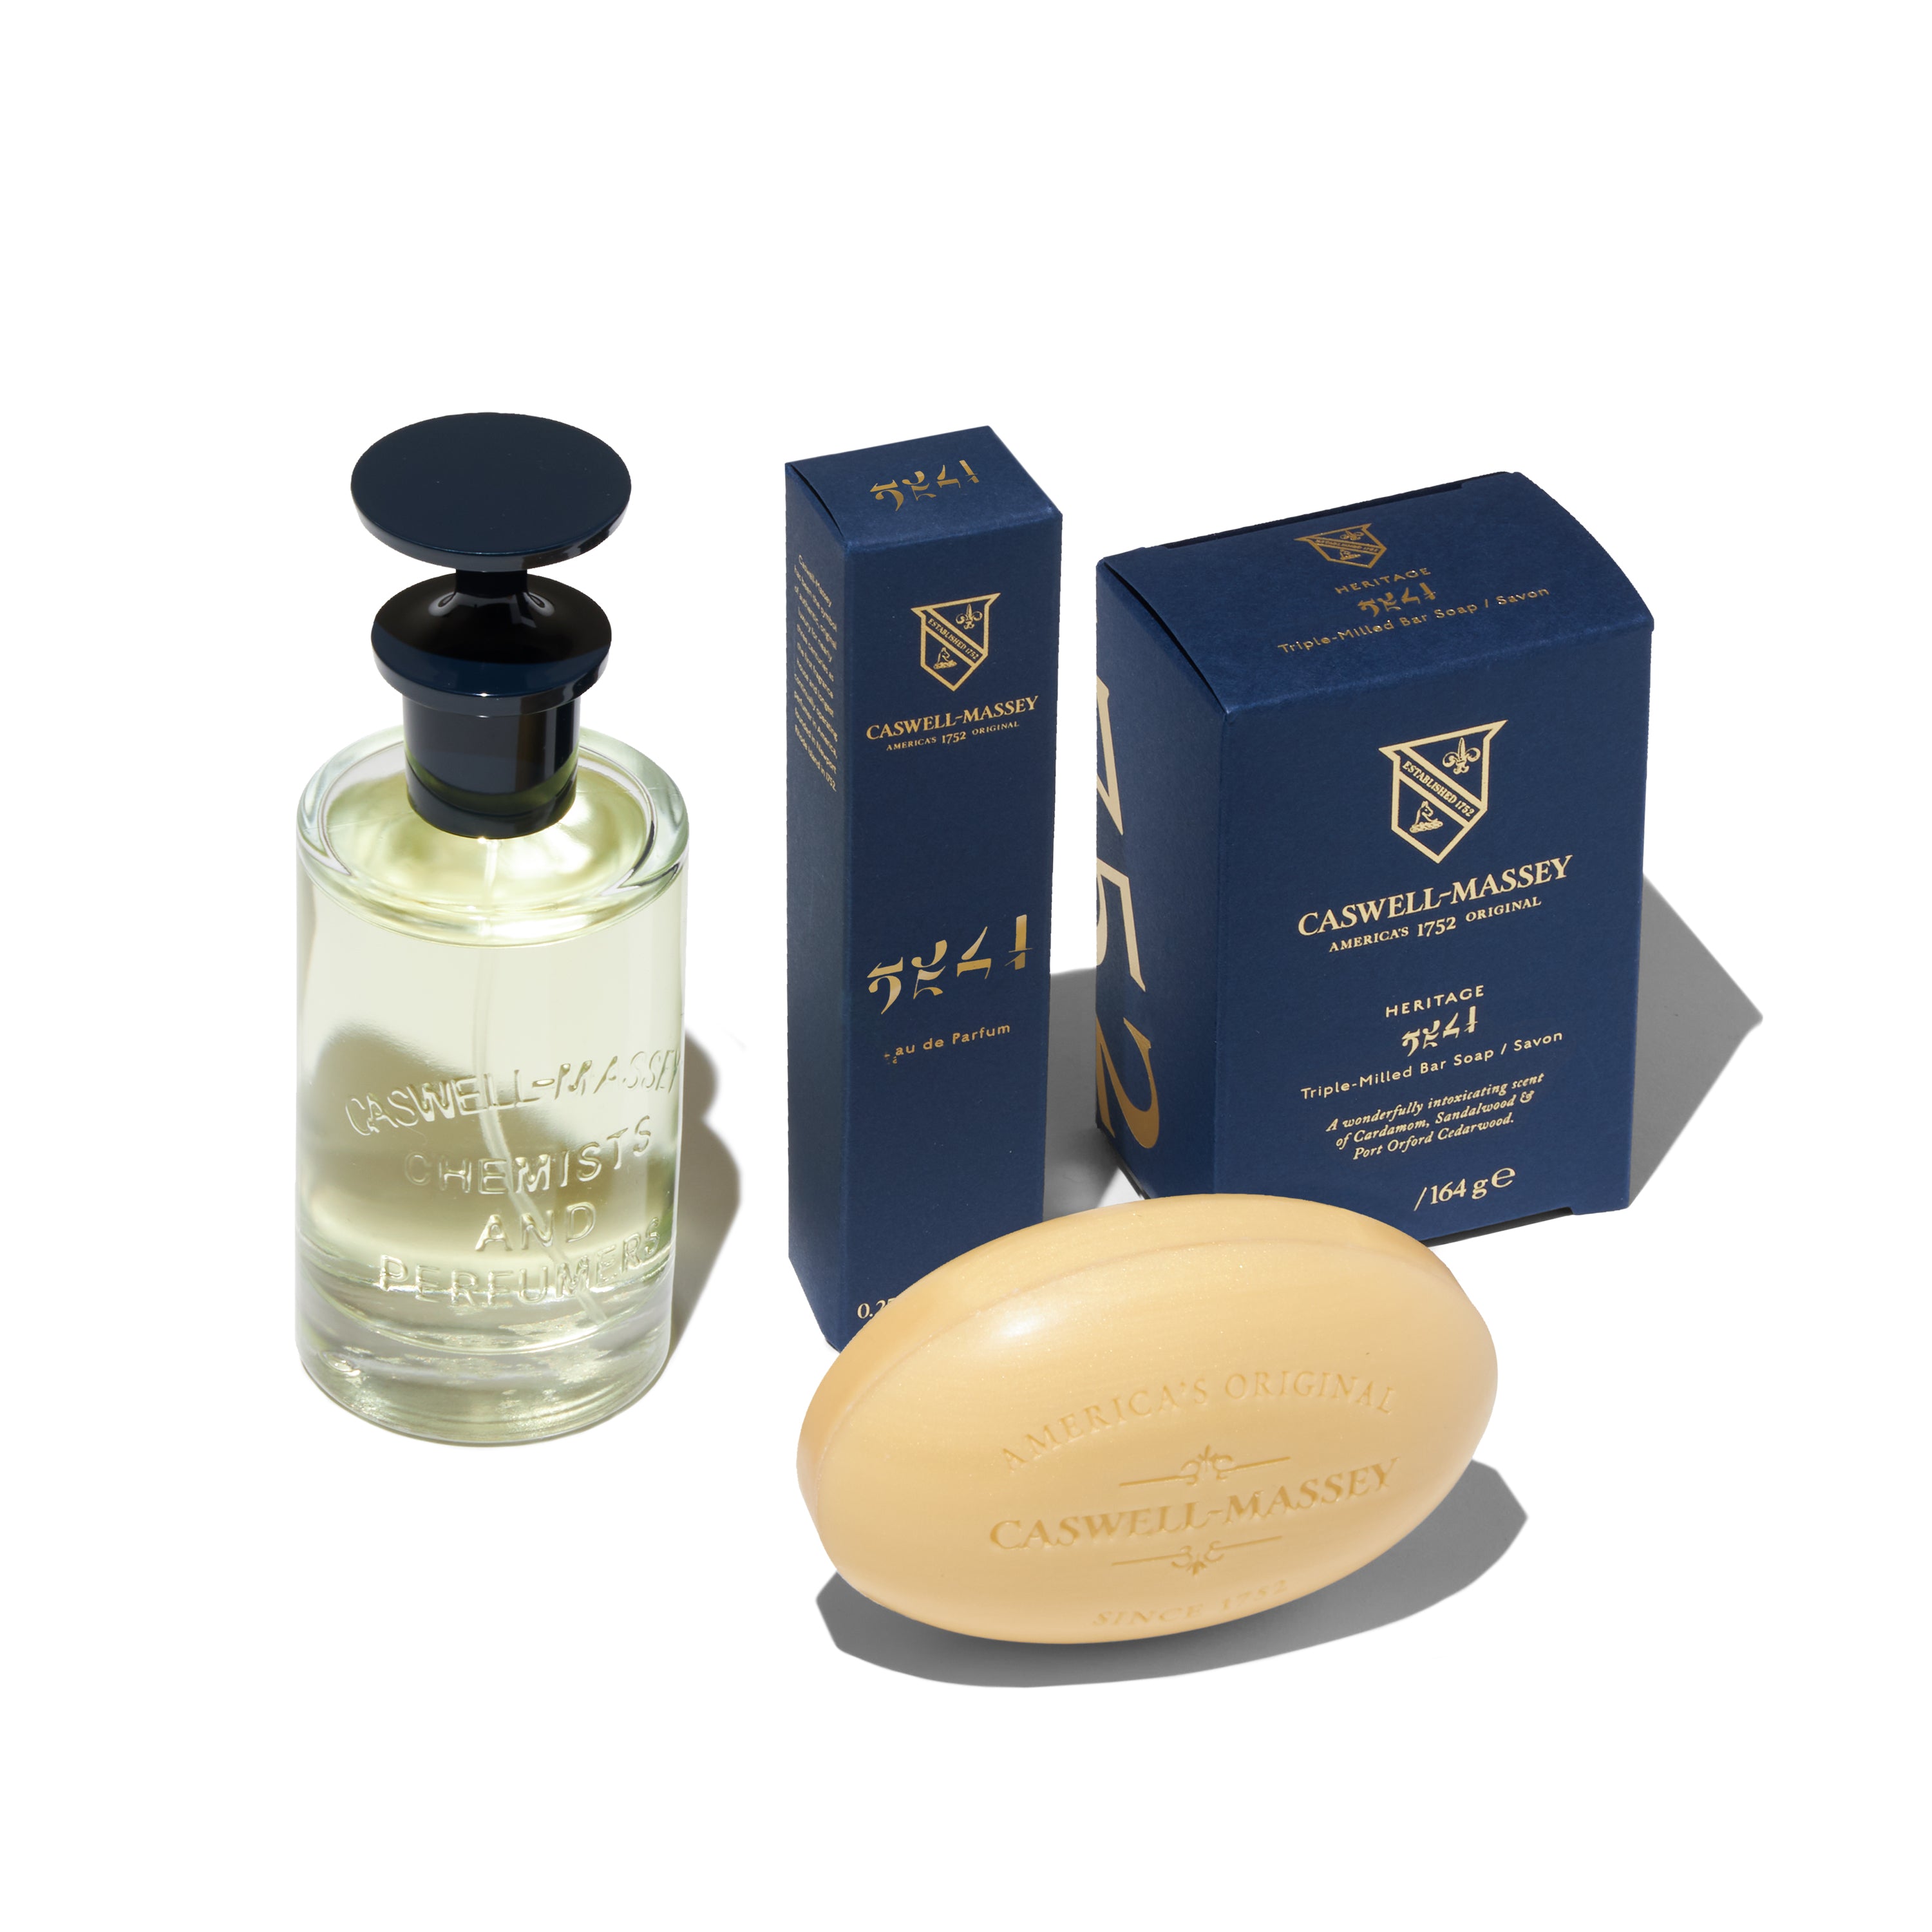 Caswell-Massey 2571 Eau de Parfum for men: showing full-size 100ml, travel size 7.5ml, and 2571 Bar Soap